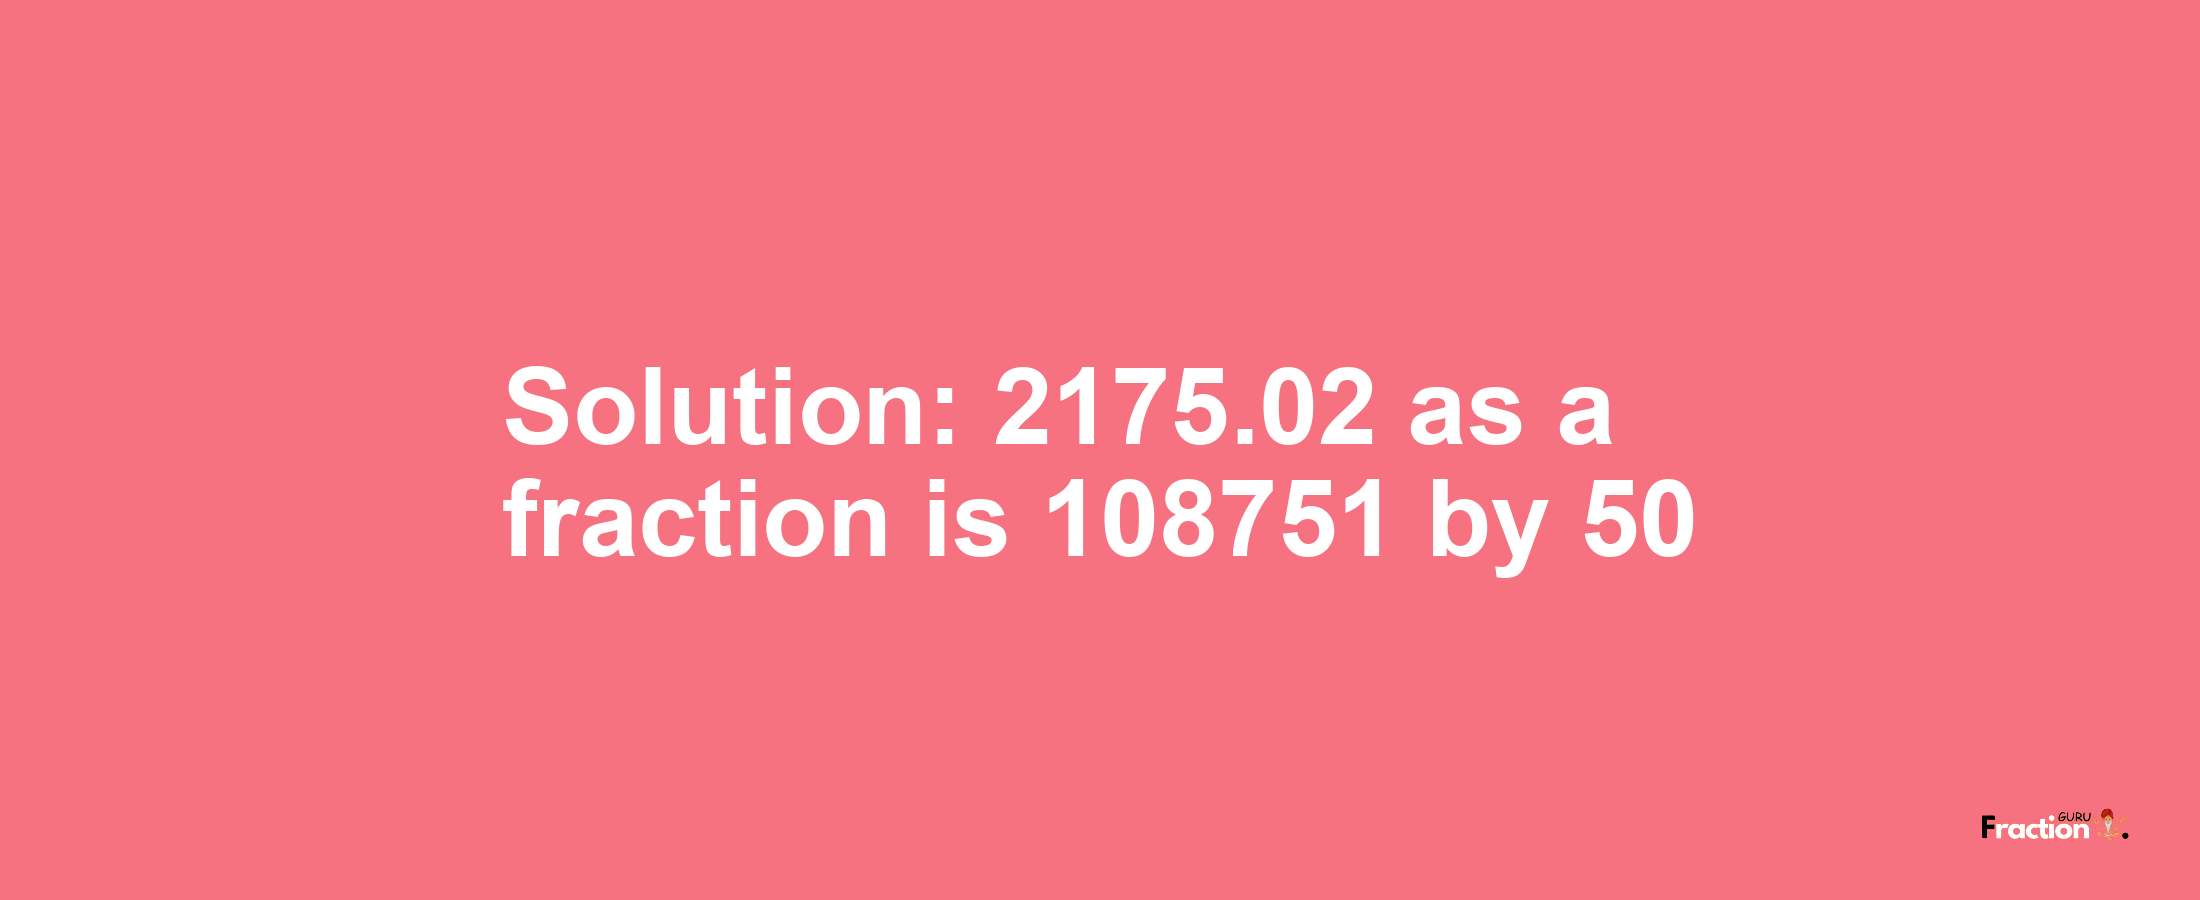 Solution:2175.02 as a fraction is 108751/50